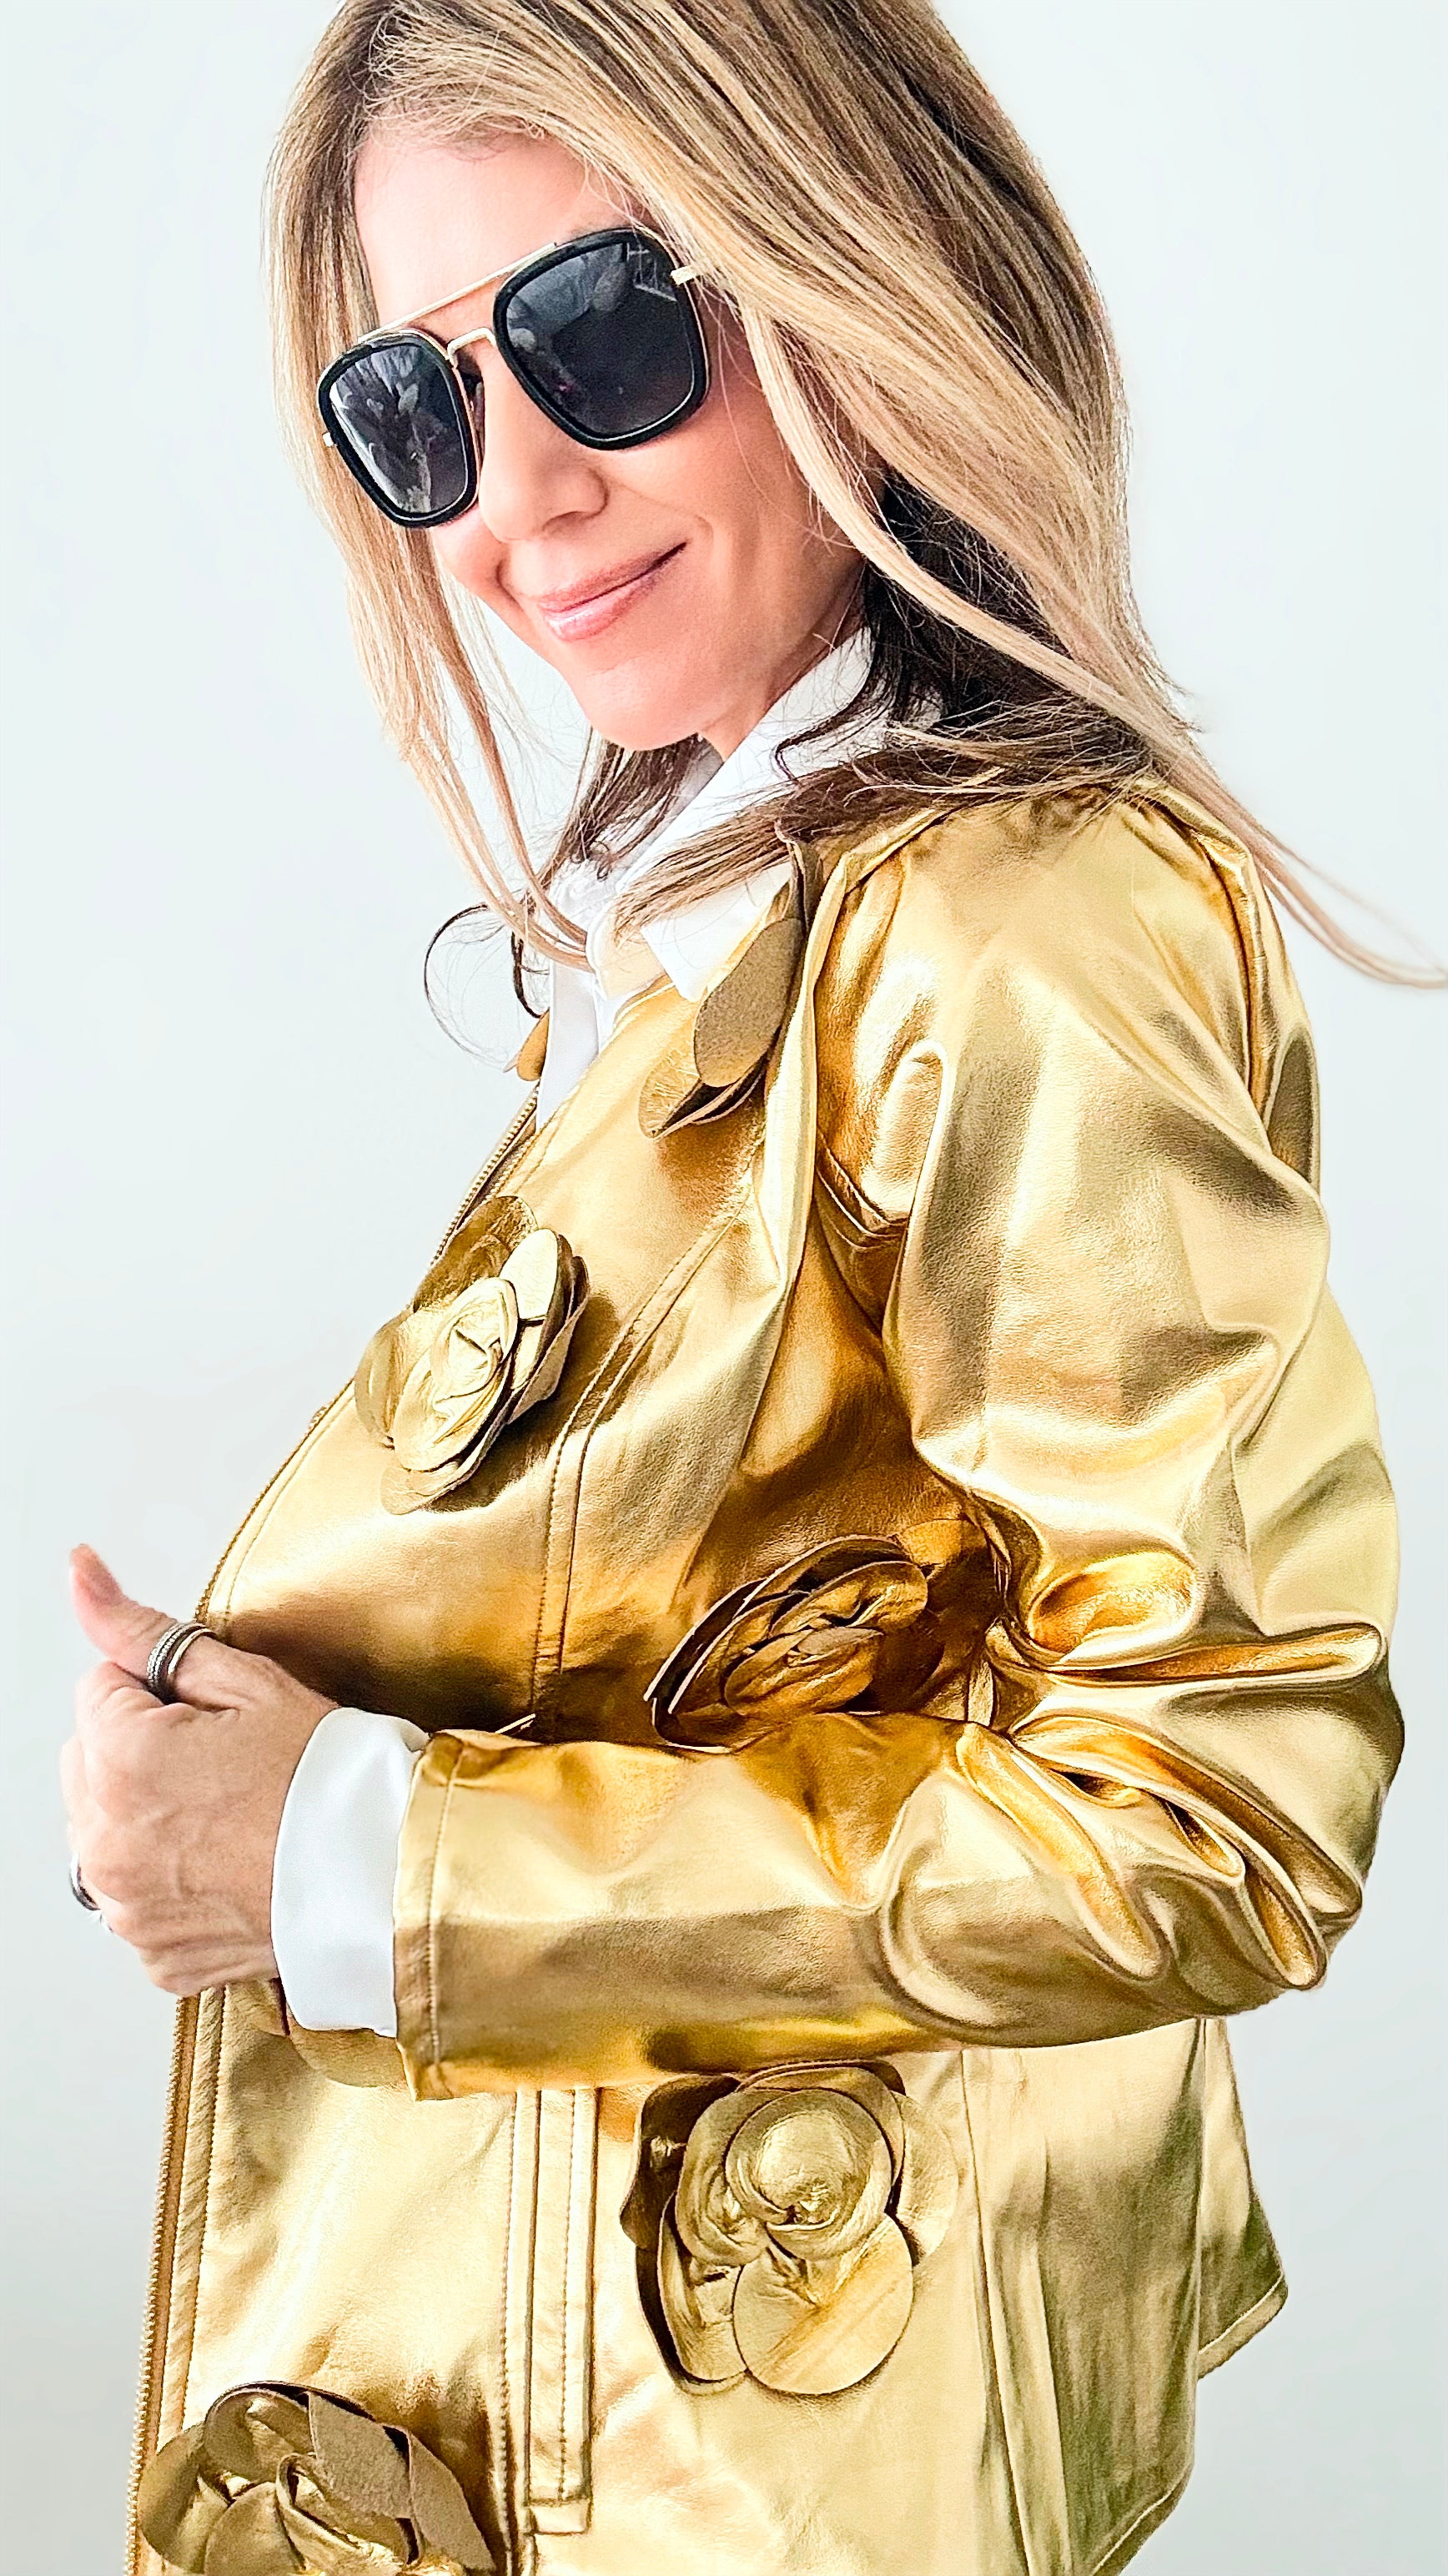 Bloom on the Moon Metallic Jacket - Gold-160 Jackets-JJ's Fairyland-Coastal Bloom Boutique, find the trendiest versions of the popular styles and looks Located in Indialantic, FL